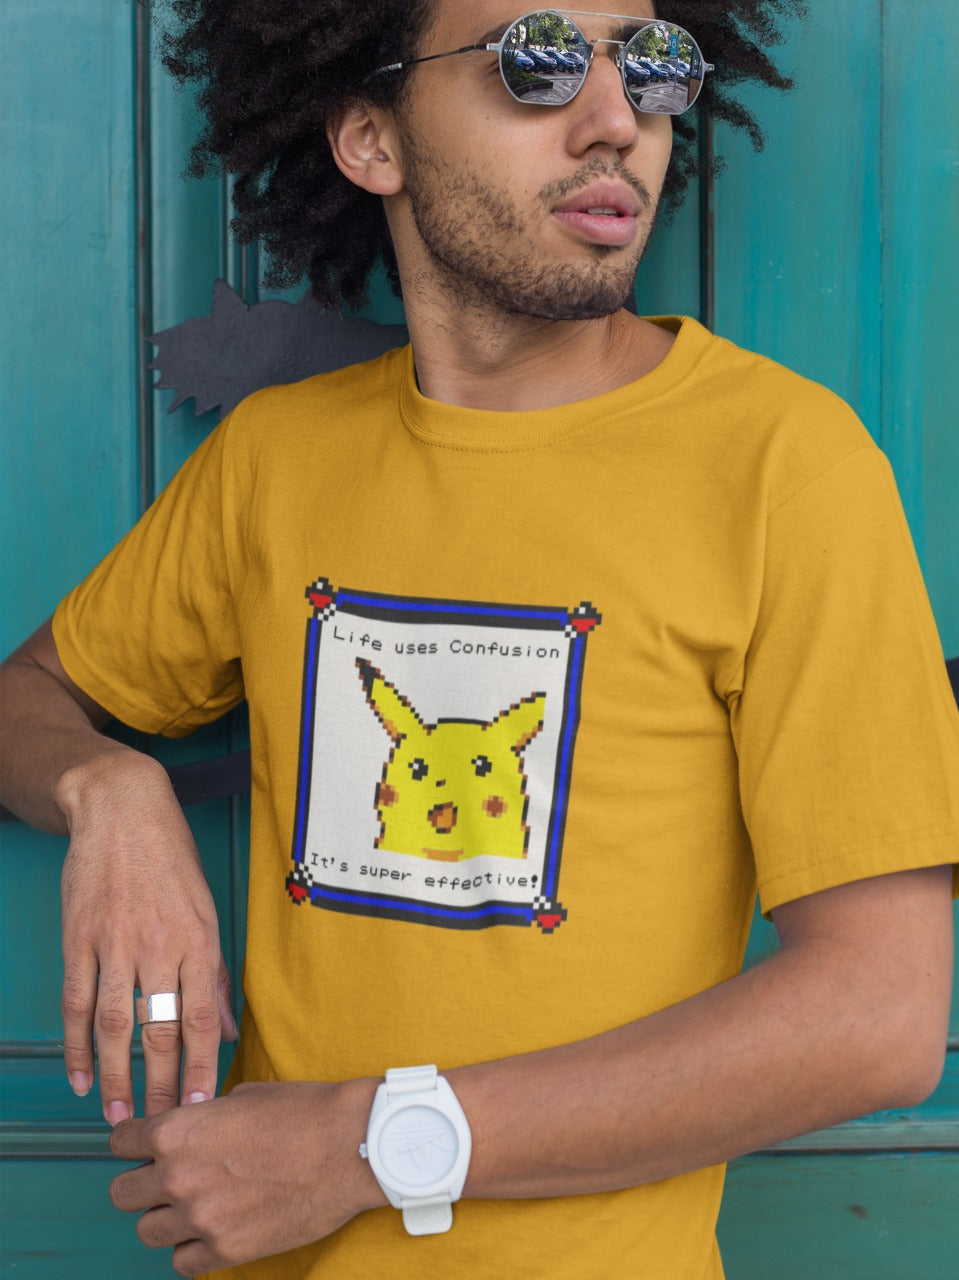 man with curly hair wearing sunglasses in front of a green door wearing a yellow tshirt with a console style photo of confused pikachu printed on it with message of "Life uses Confusion It's super effective", relatable Pokemon memes